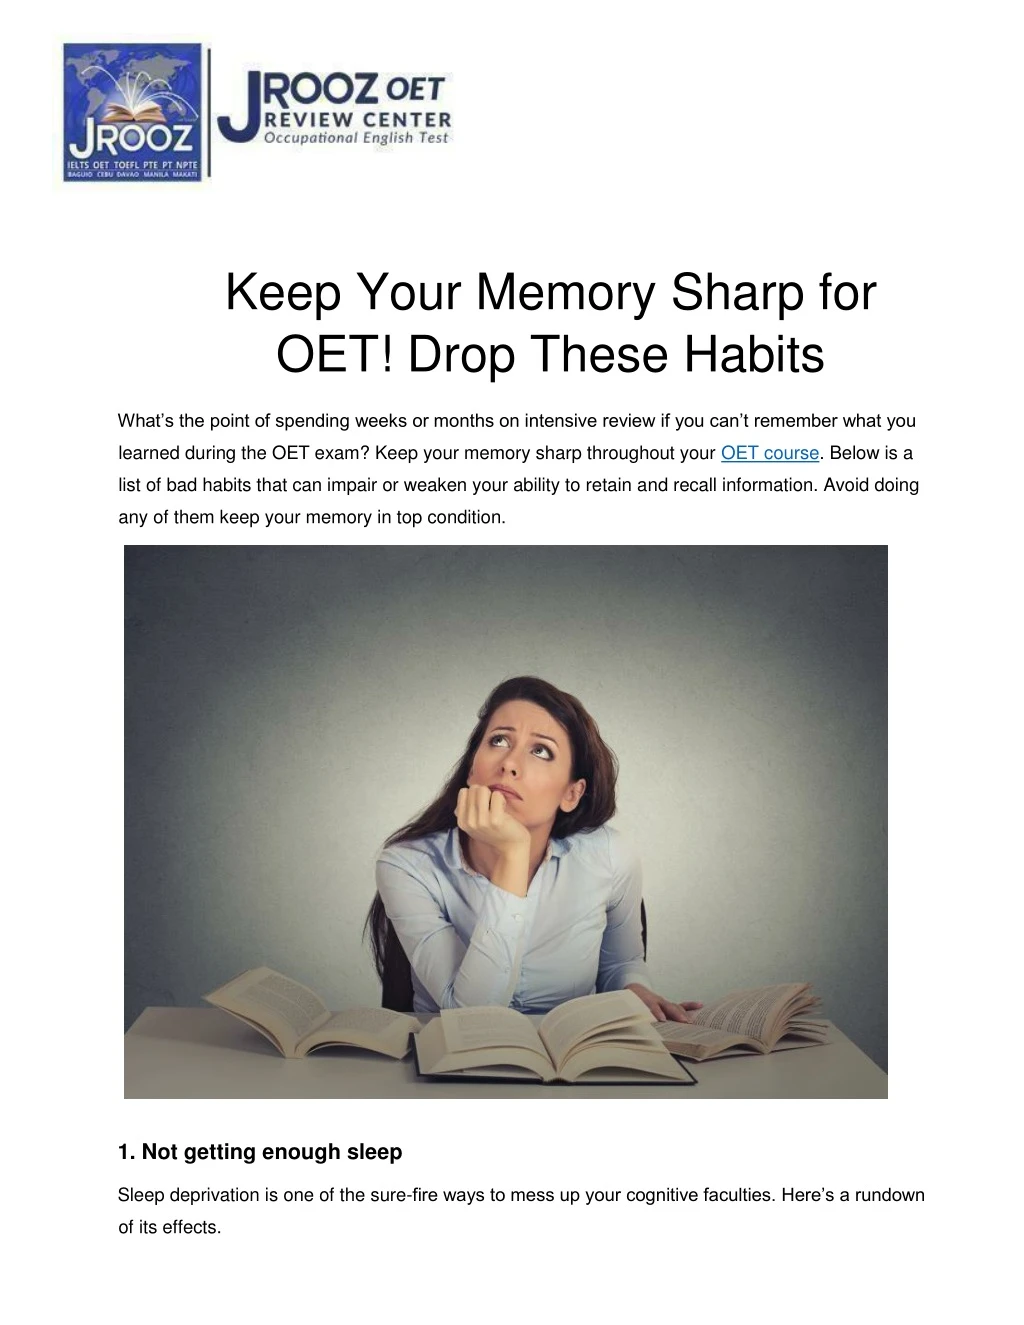 keep your memory sharp for oet drop these habits